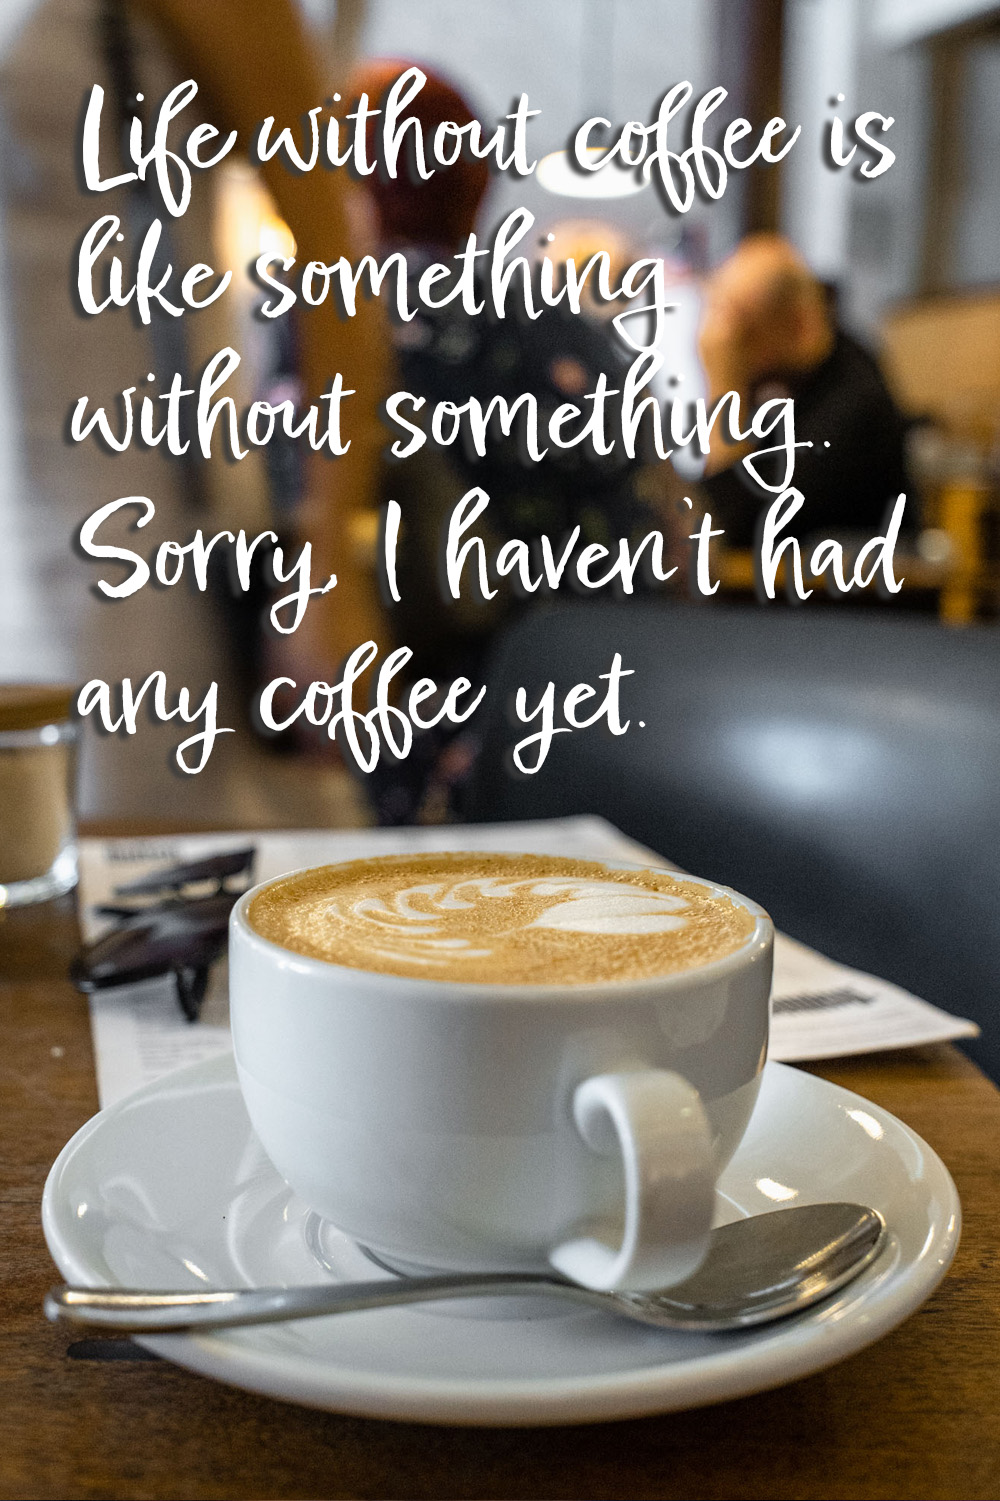 Good morning Coffee Quotes